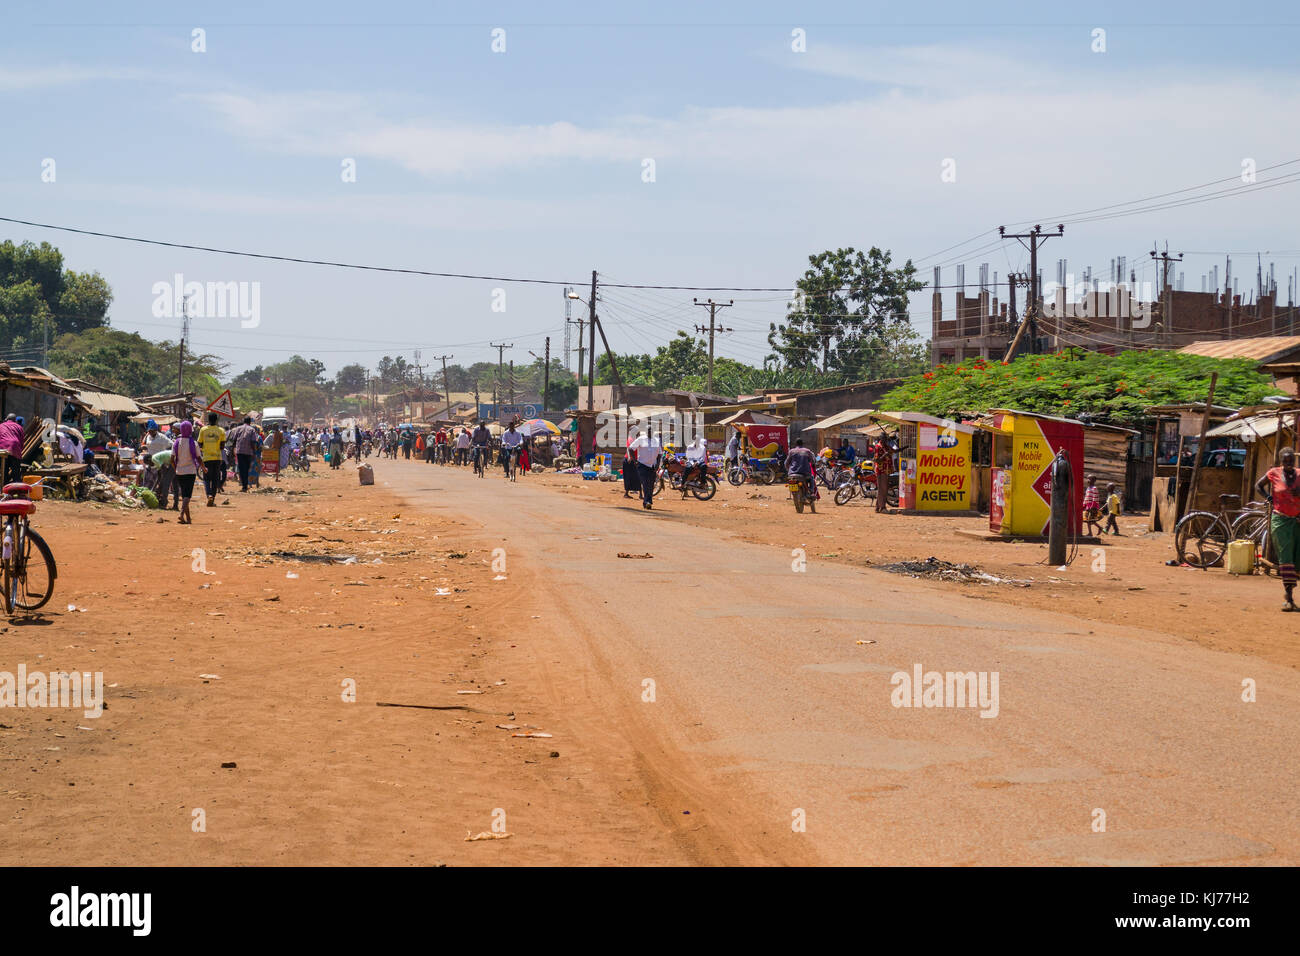 A busy main road with people, market stalls and shops lining it, Busia, Uganda, East Africa Stock Photo